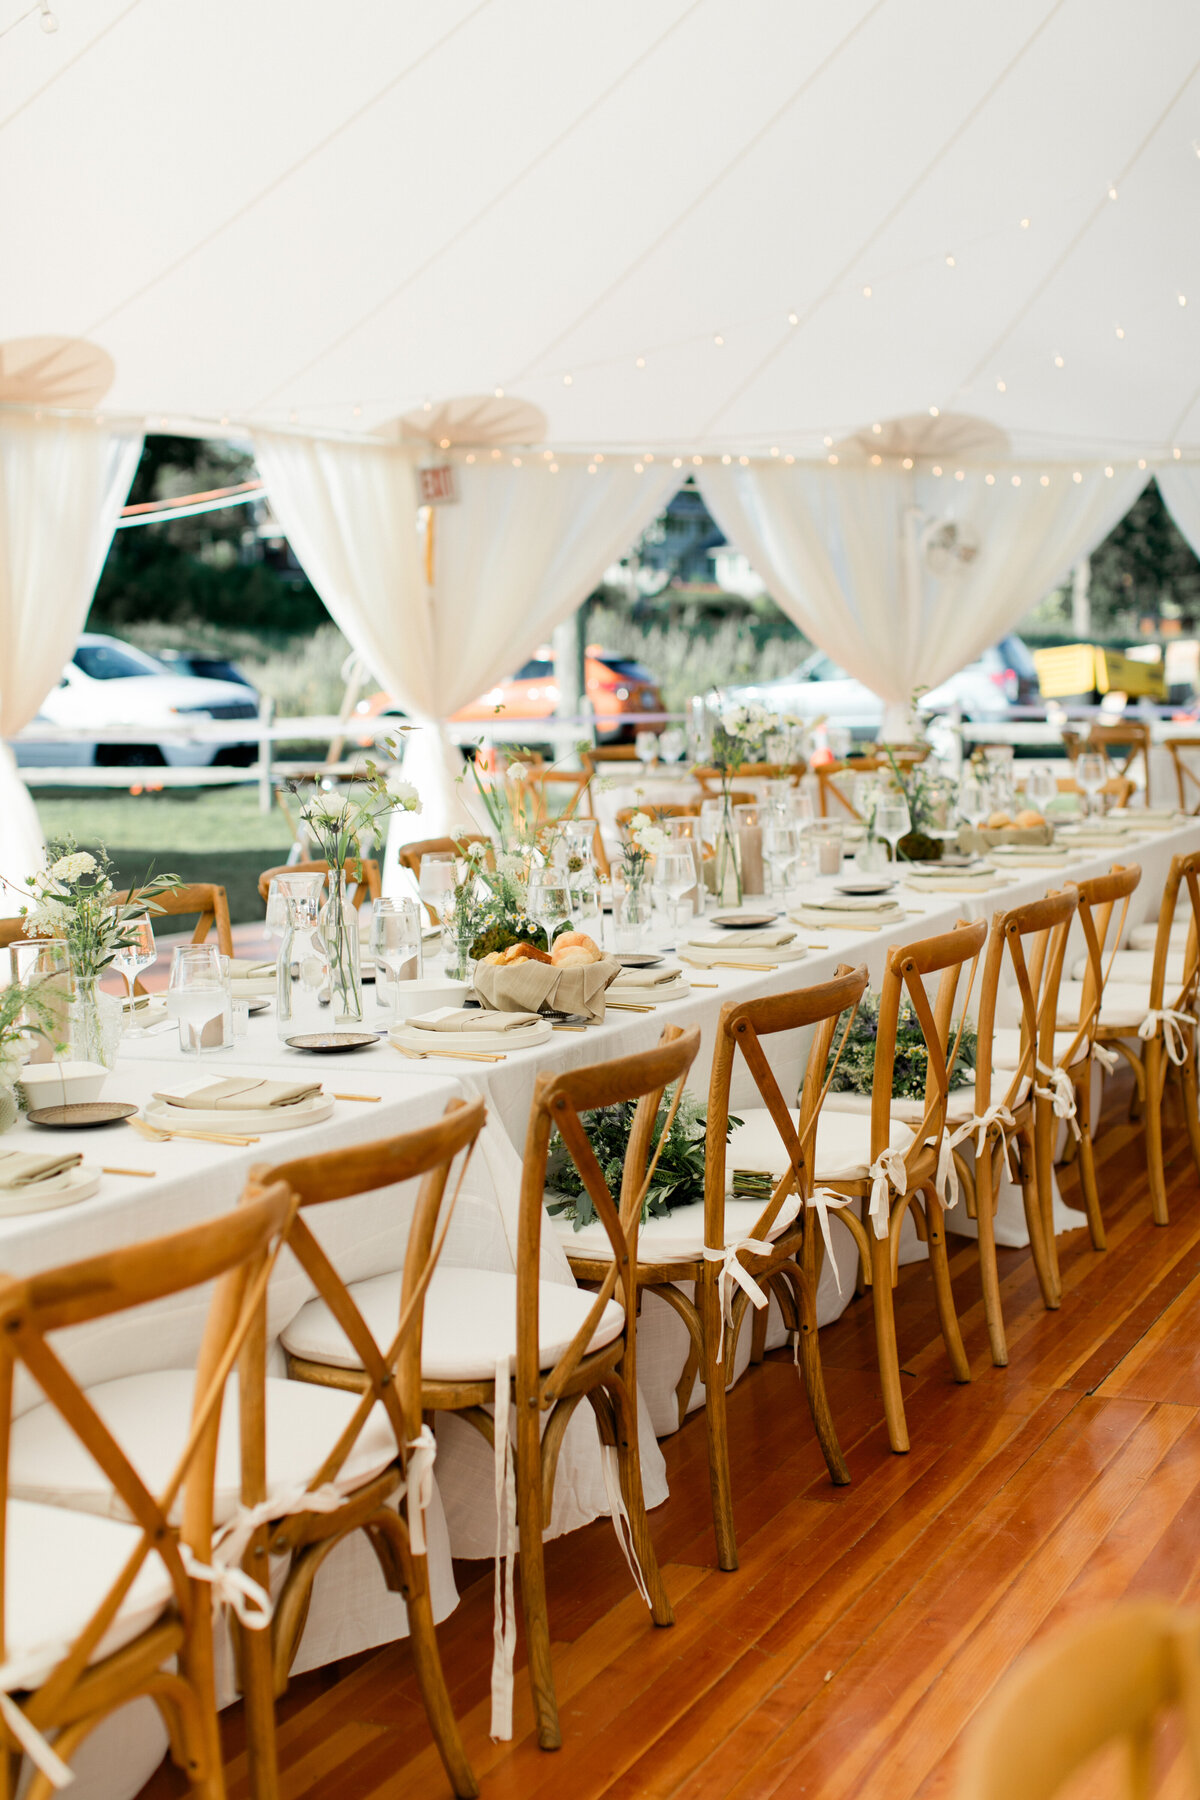 new-england-tent-wedding-greenery-flowers-candles-partial-perimeter-draping